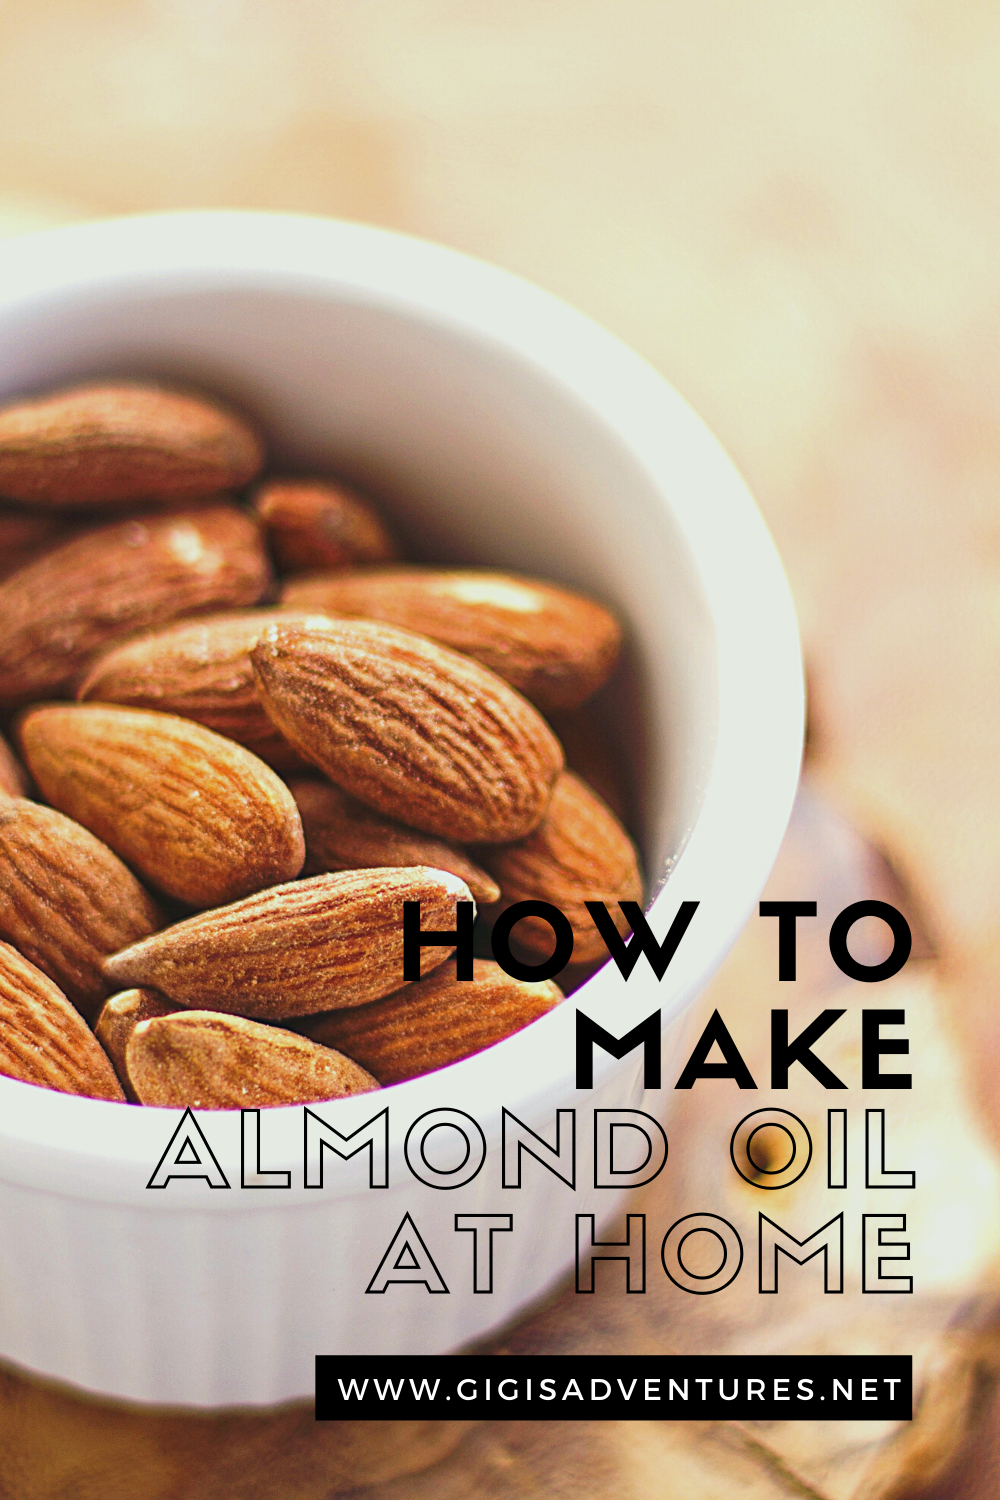 How To Make Almond Oil At Home - DIY Almond Oil | Homemade Almond Oil